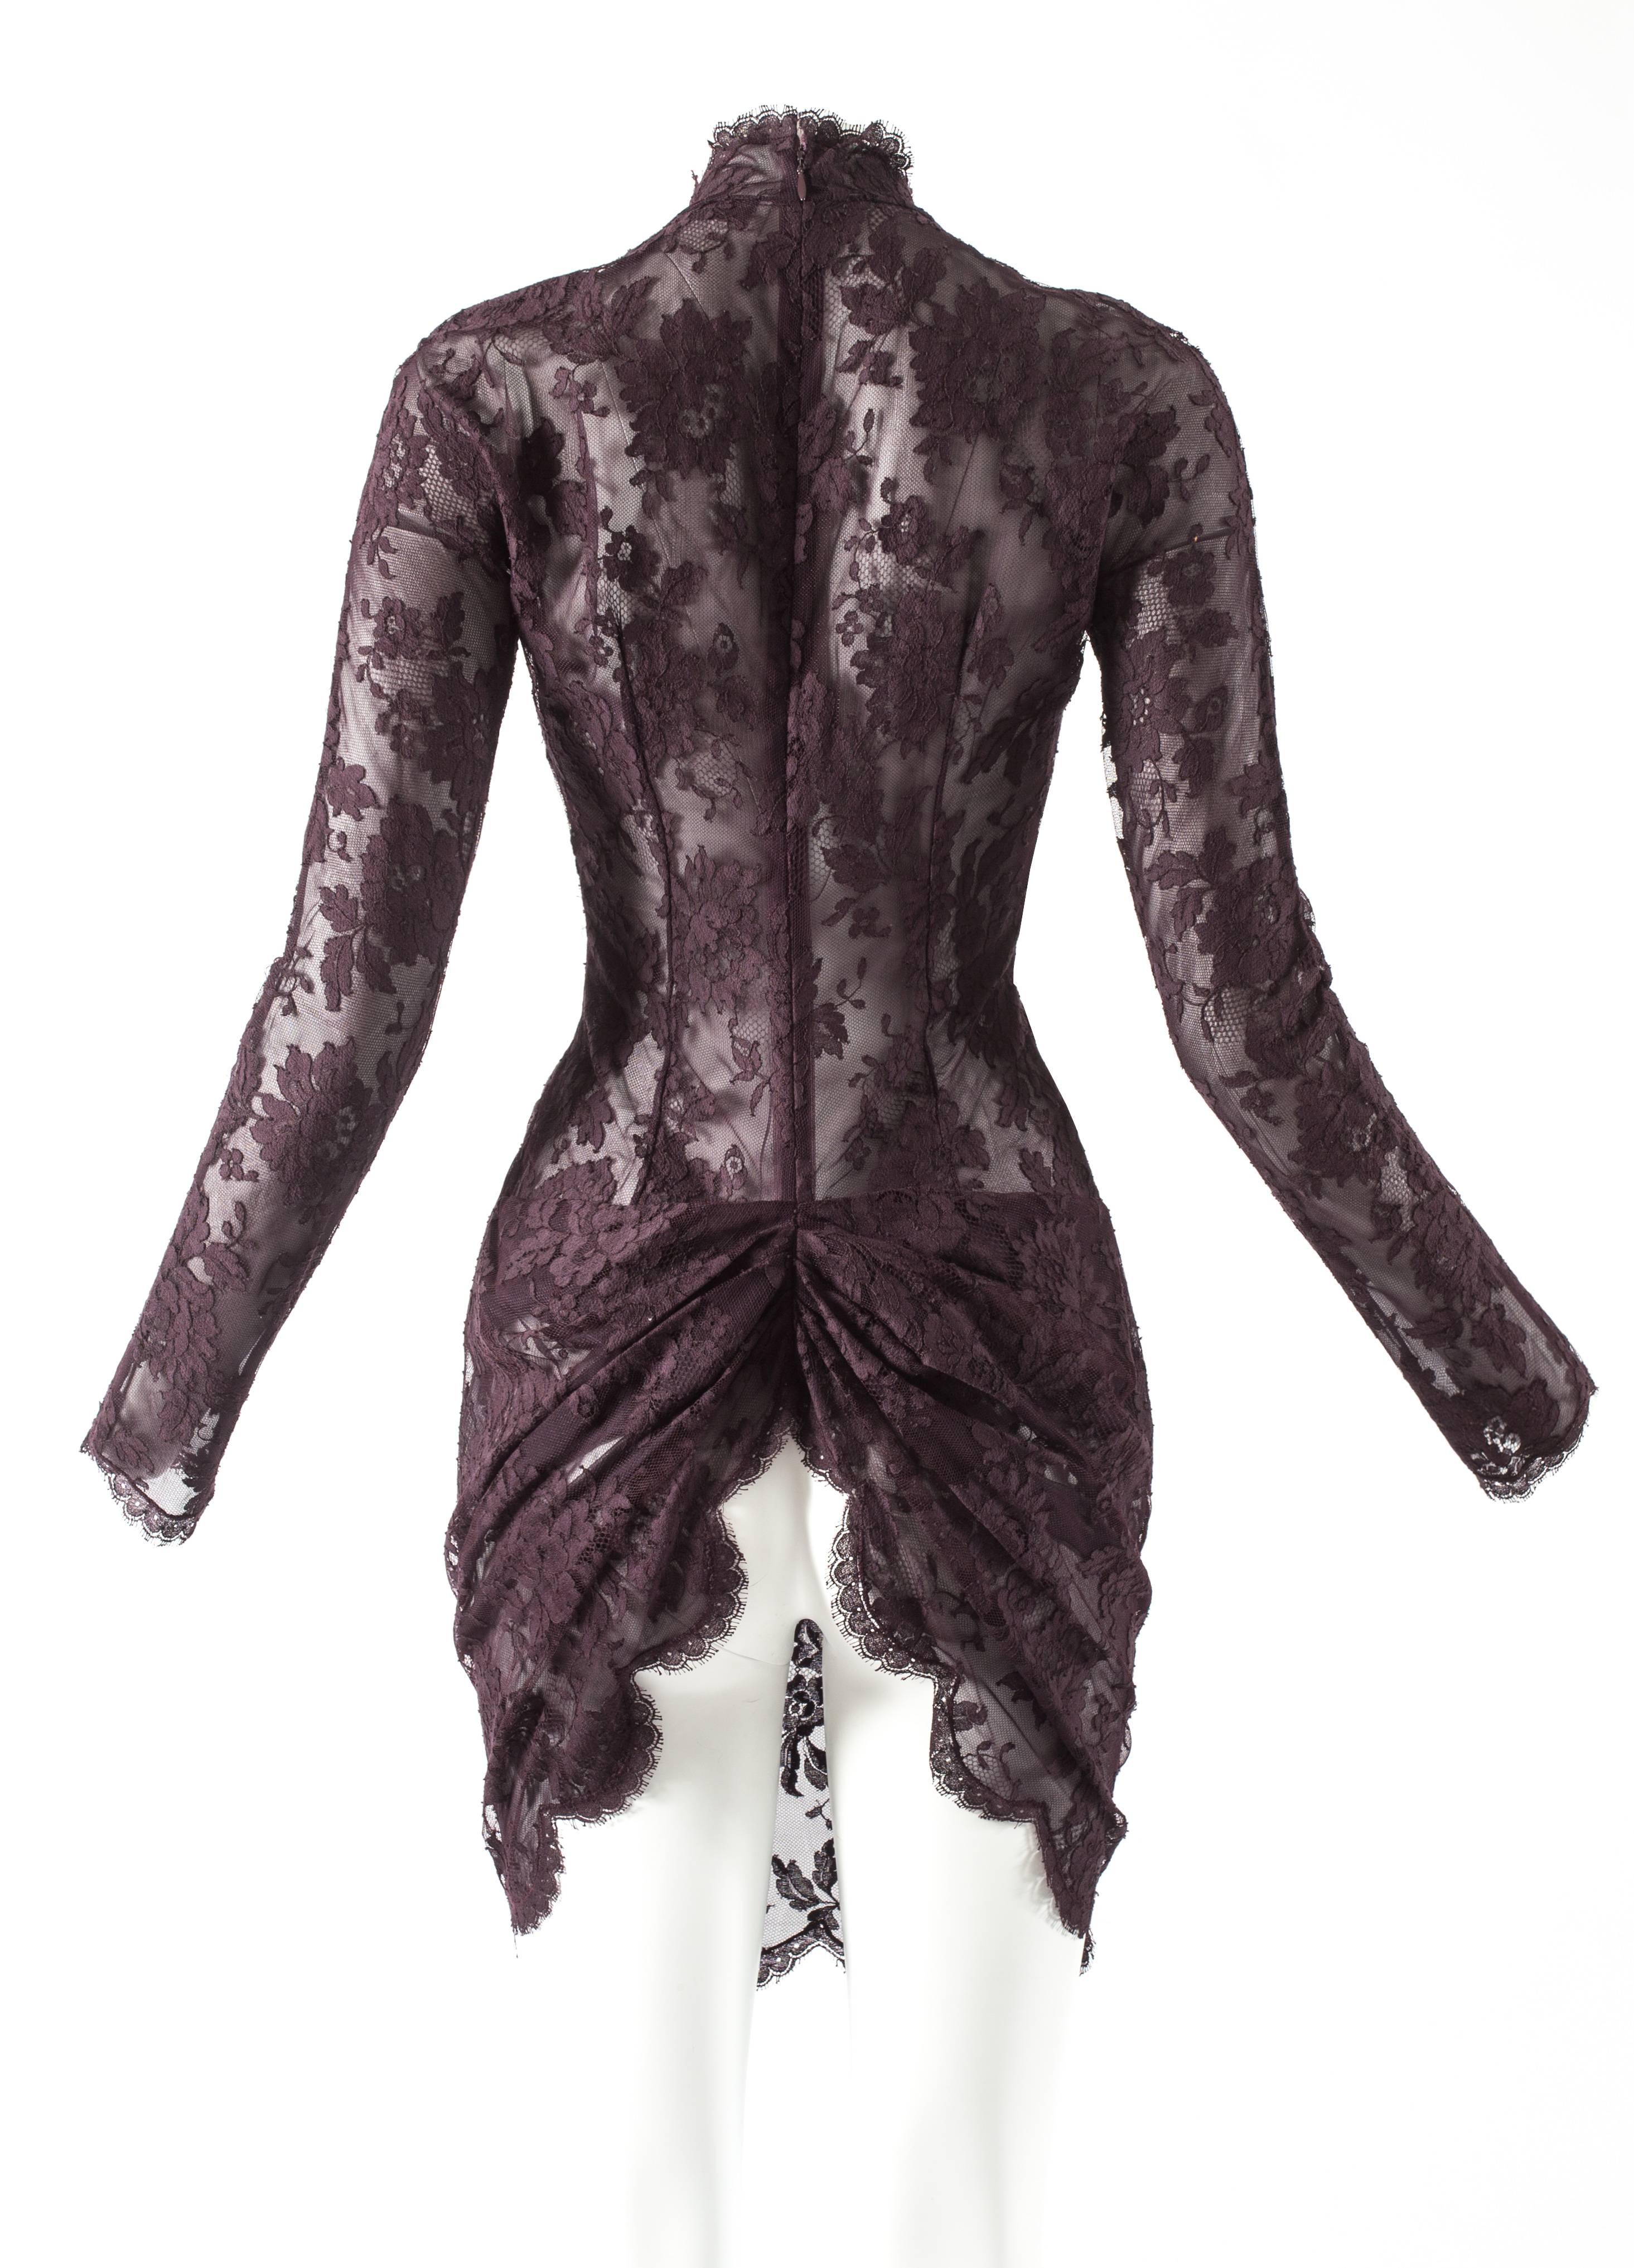 Givenchy by John Galliano Haute Couture Autumn-Winter 1996 lace mini dress 2